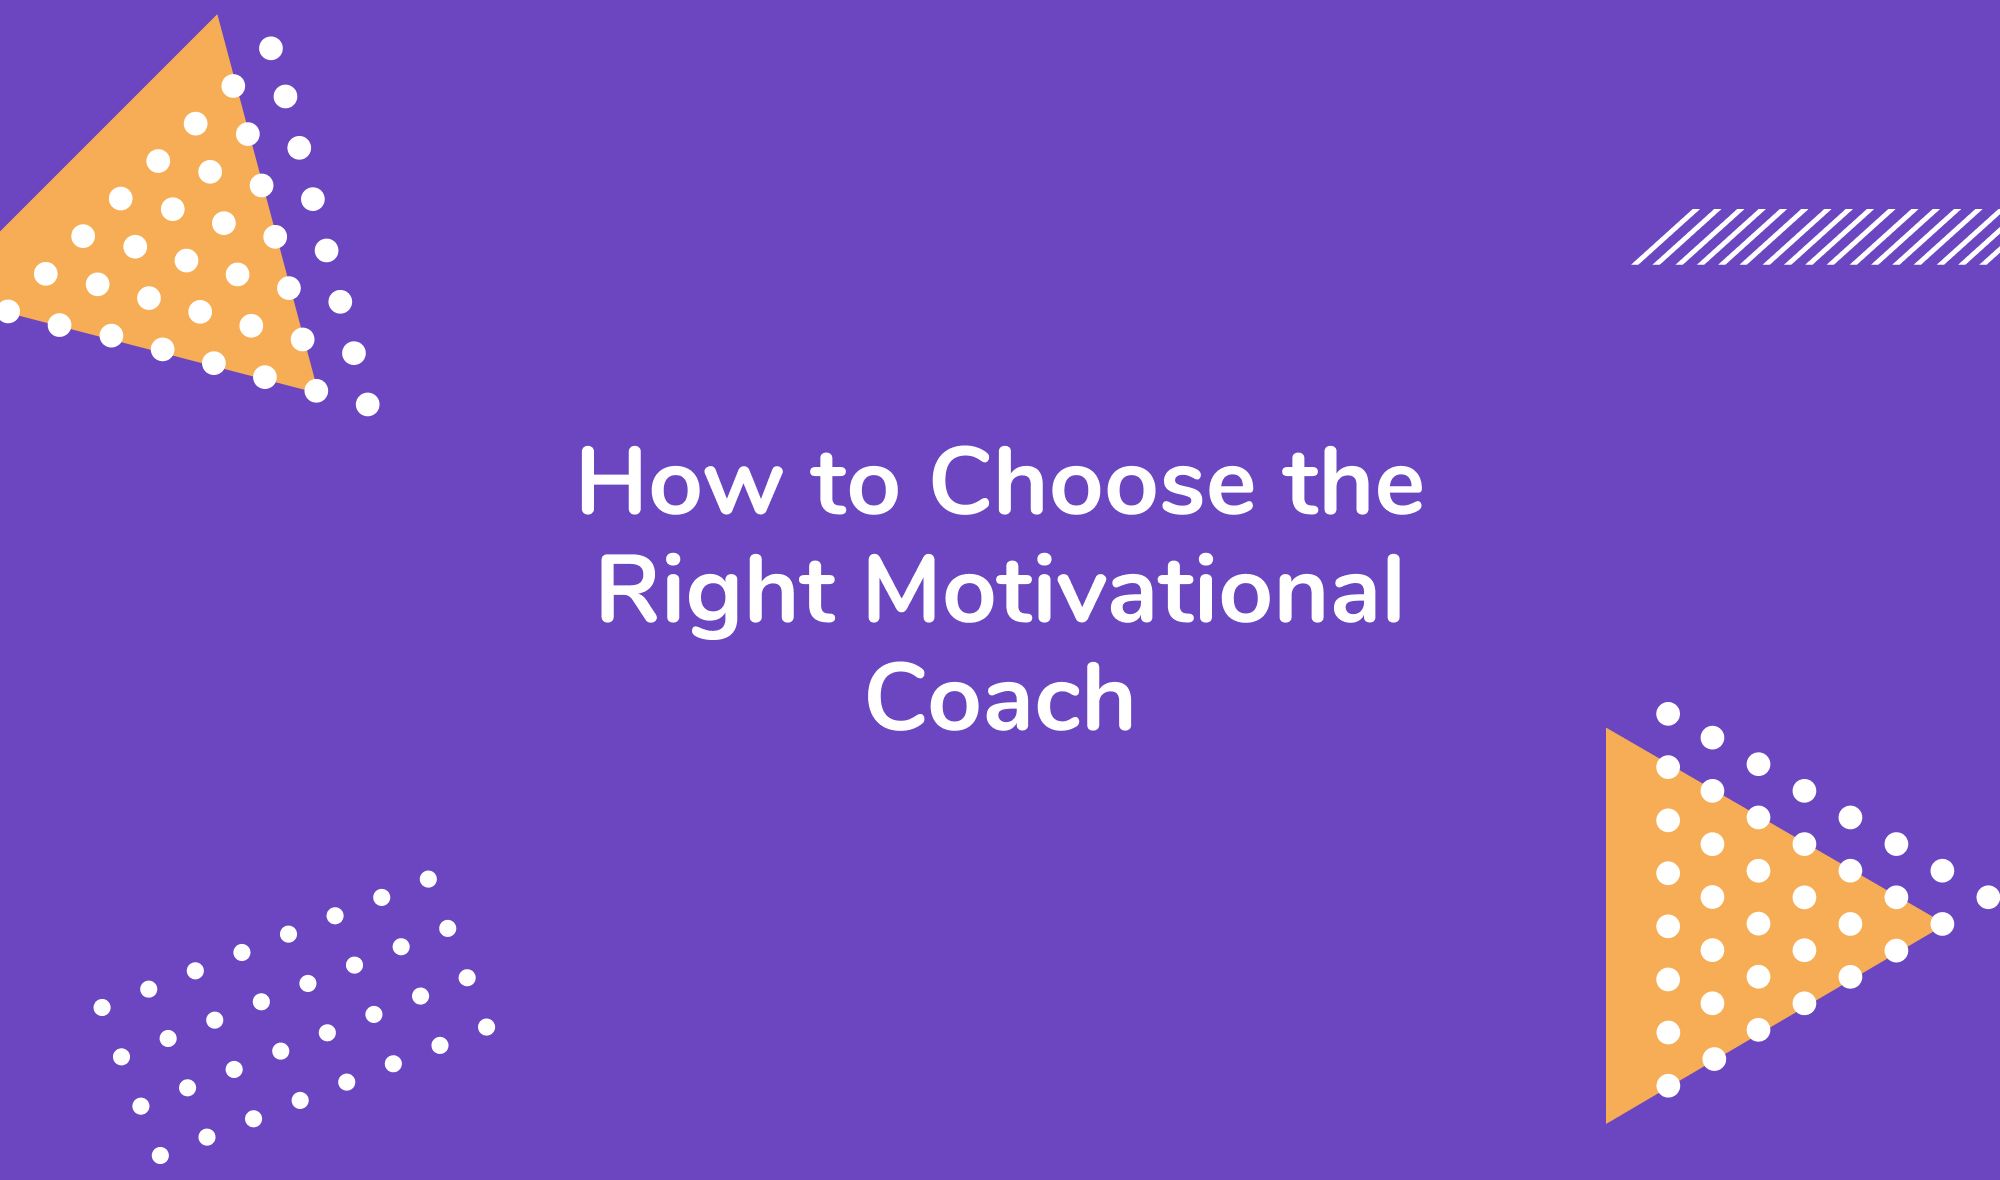 How to Choose the Right Motivational Coach for You